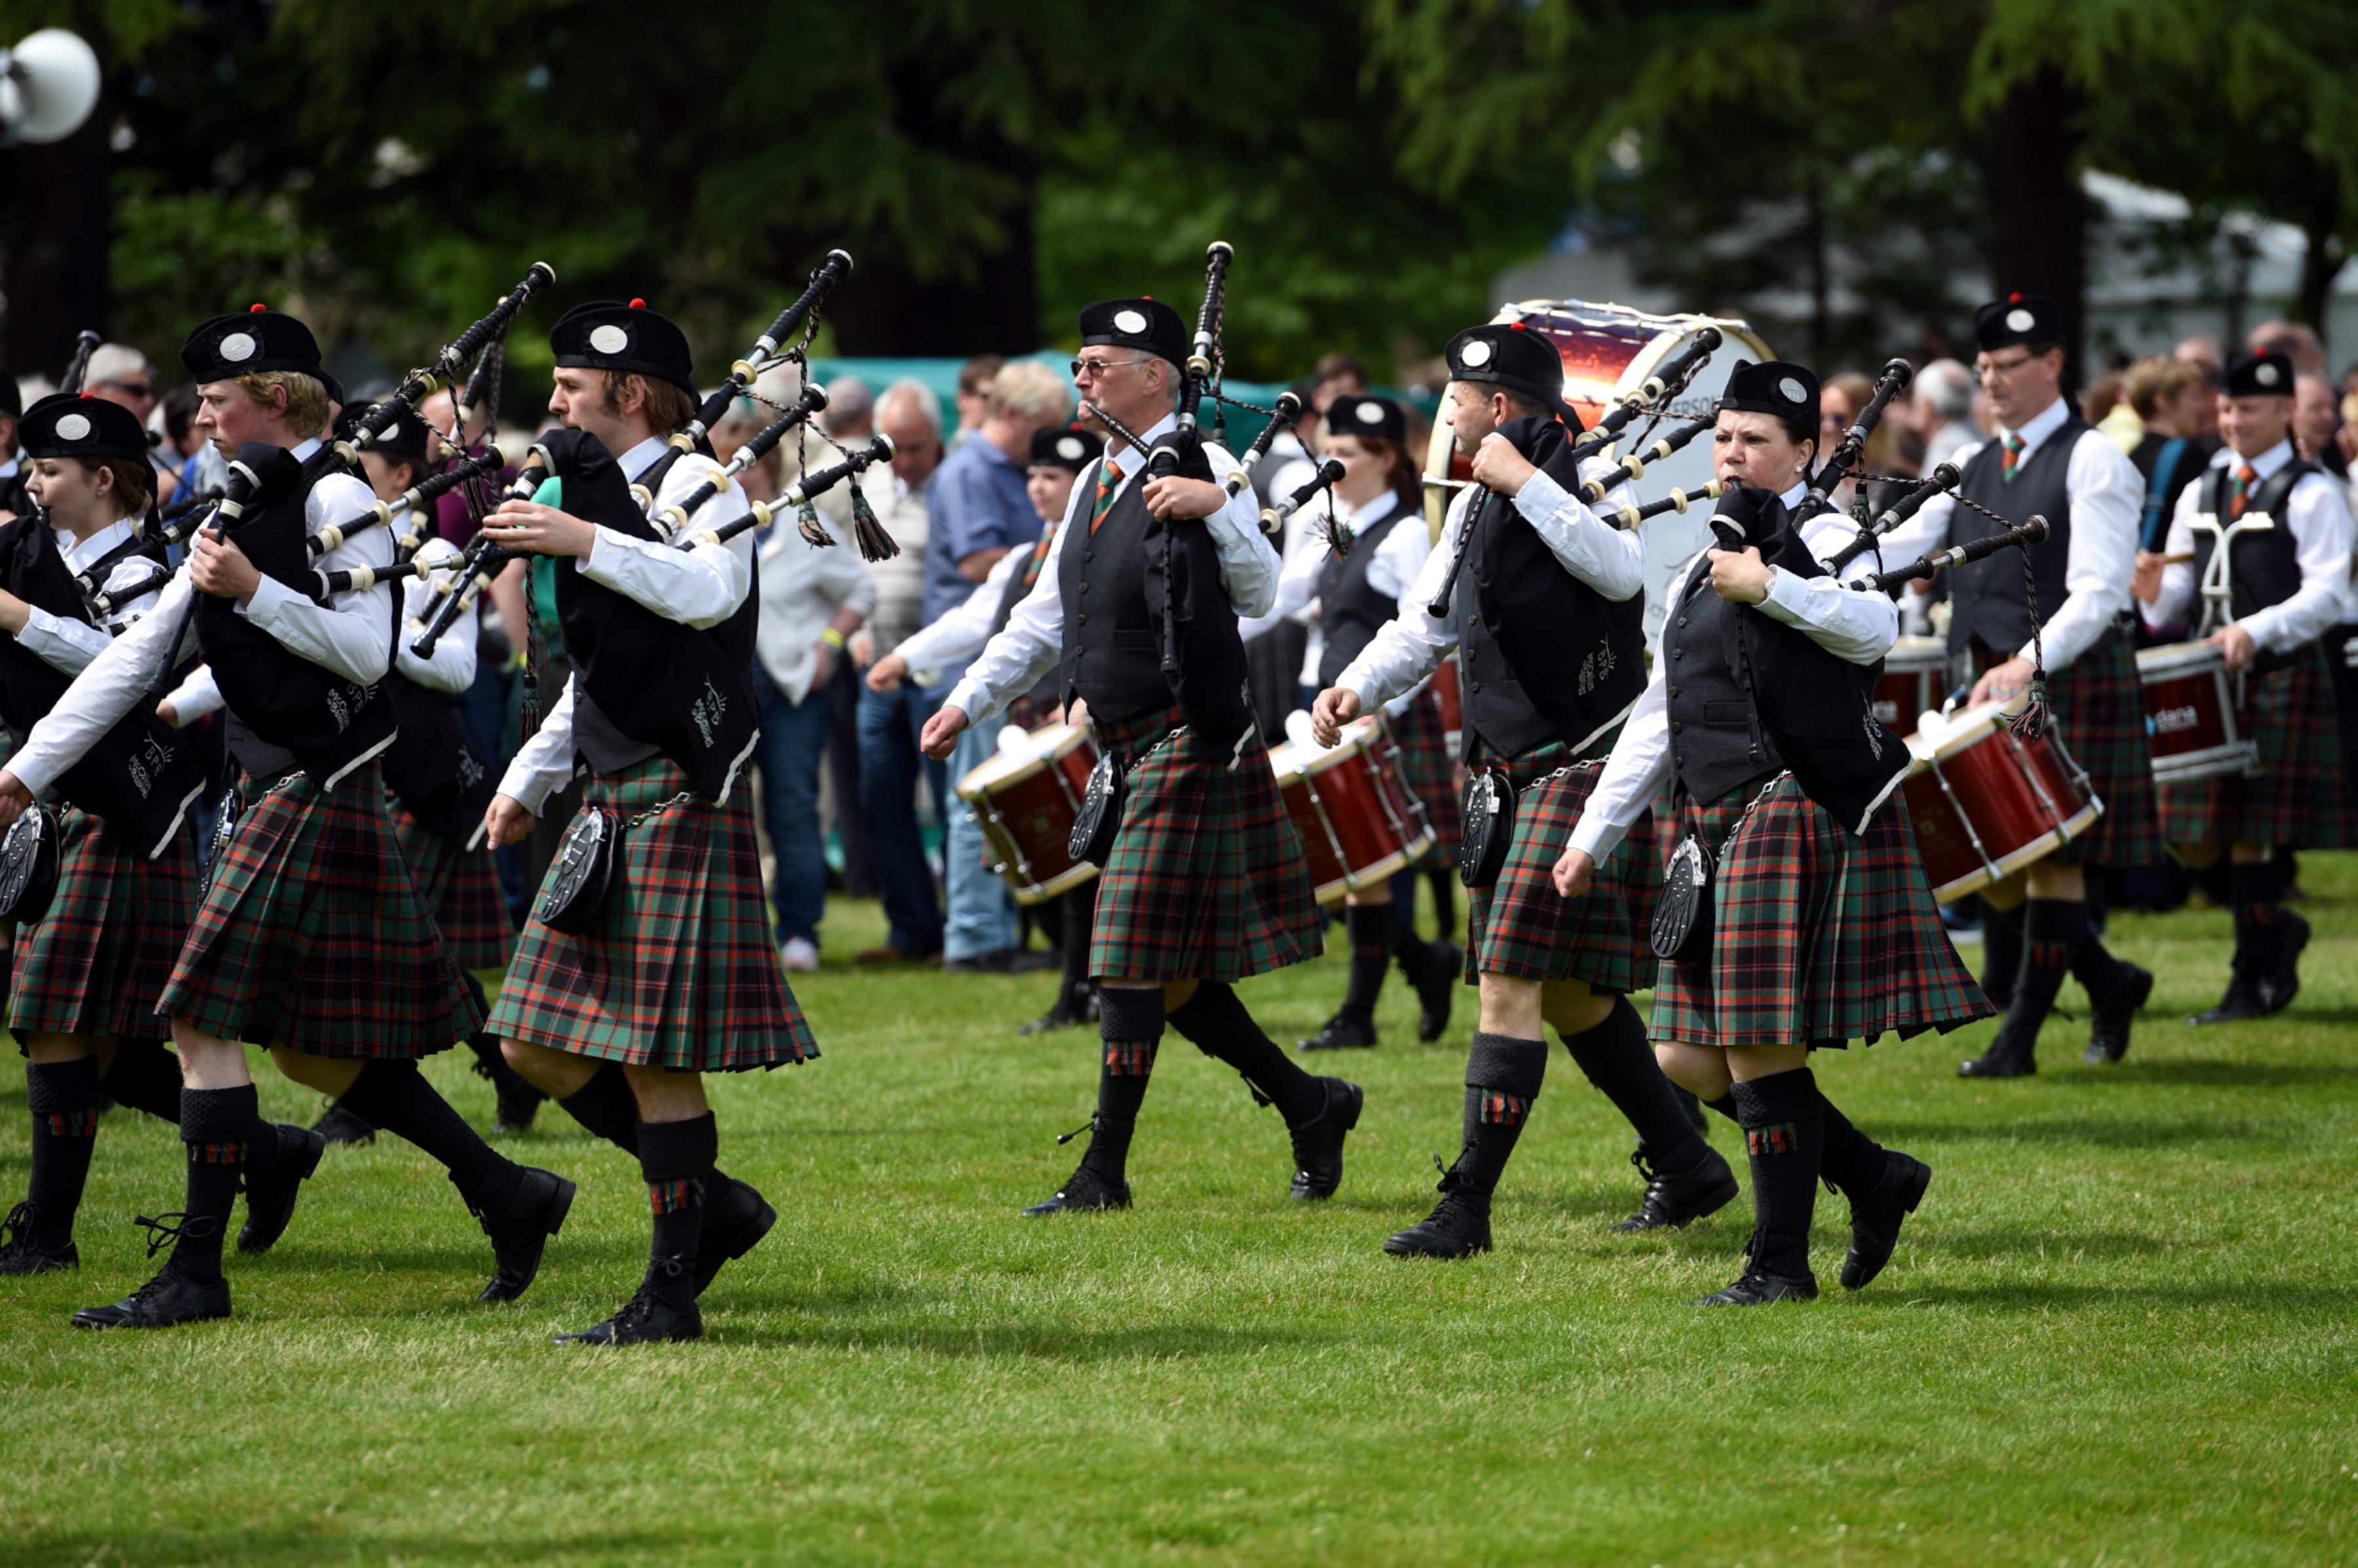 Piping Forres 2015 - European Pipe Band Championships at Grant Park, Forres. Marching off after competing.

Picture by Gordon Lennox 27/06/2015